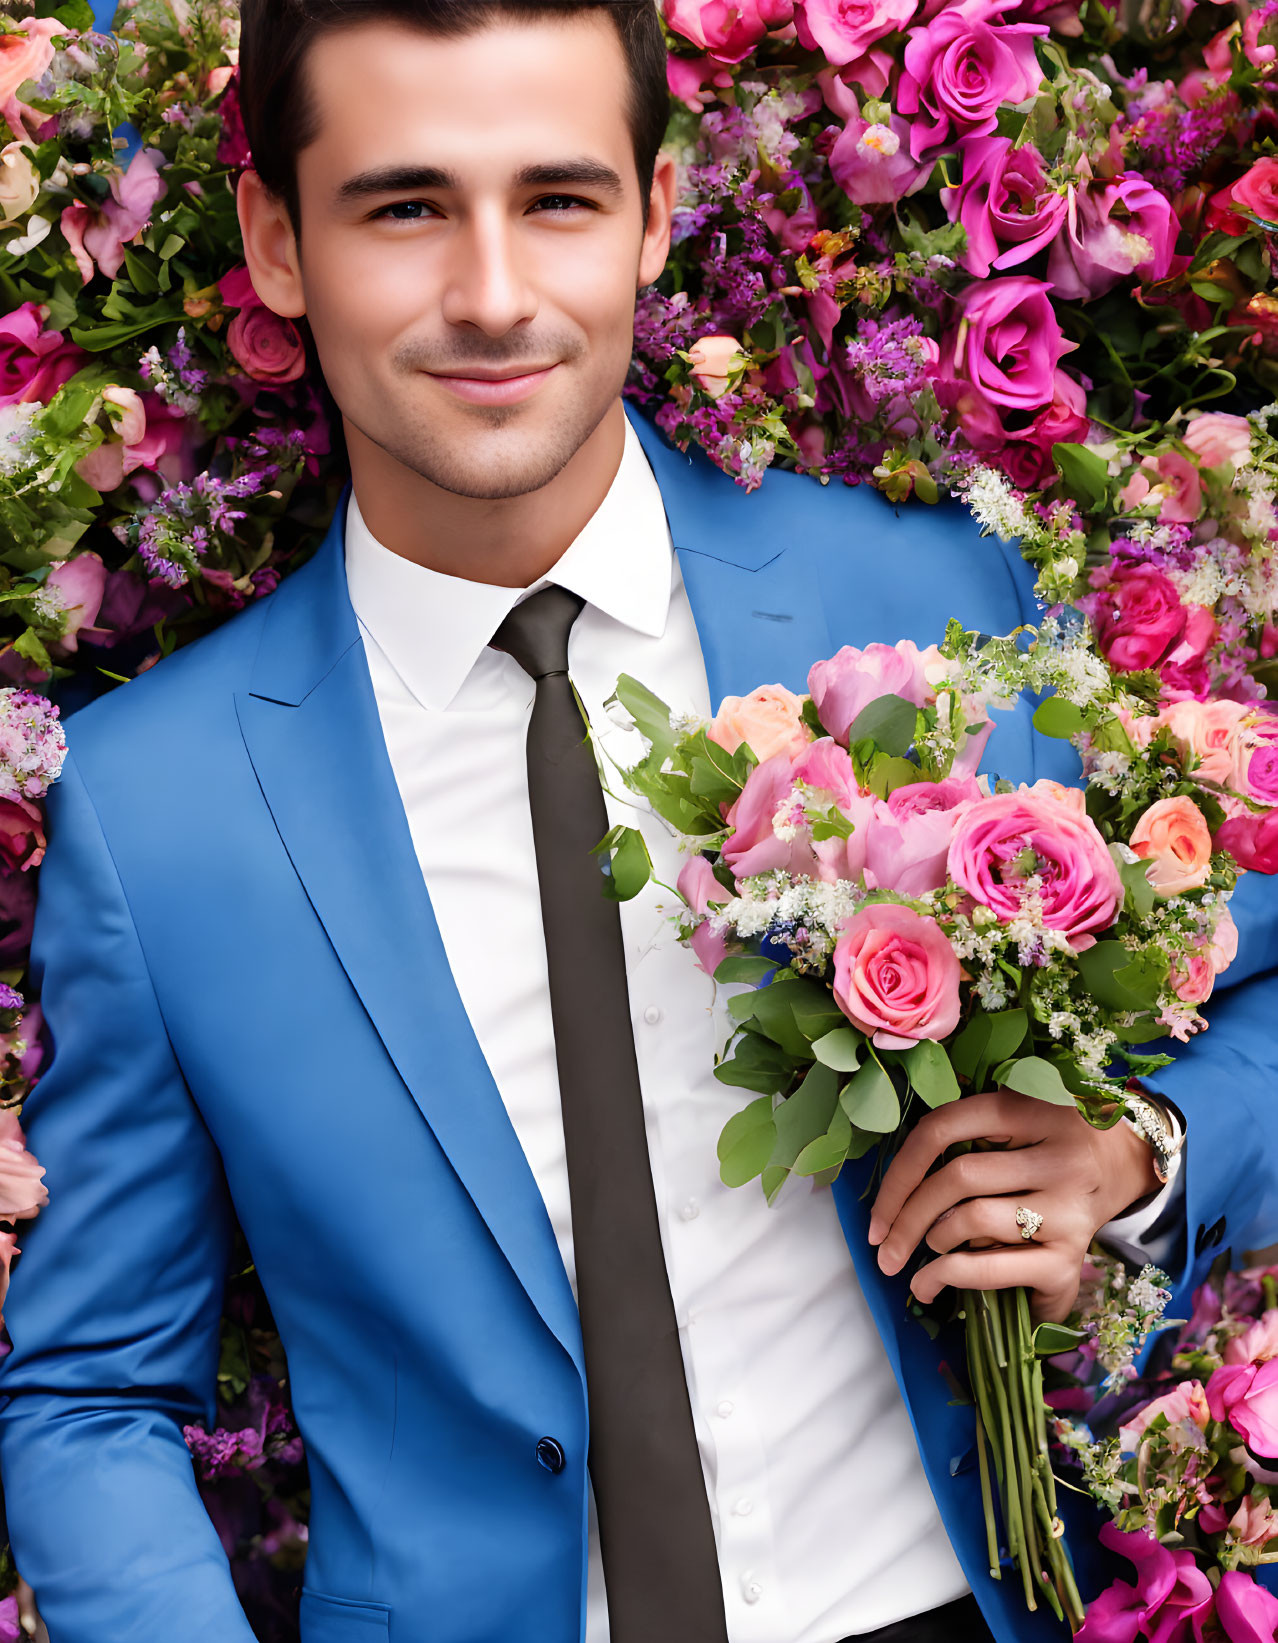 Man in Blue Suit Holding Bouquet Surrounded by Vibrant Pink and Purple Flowers